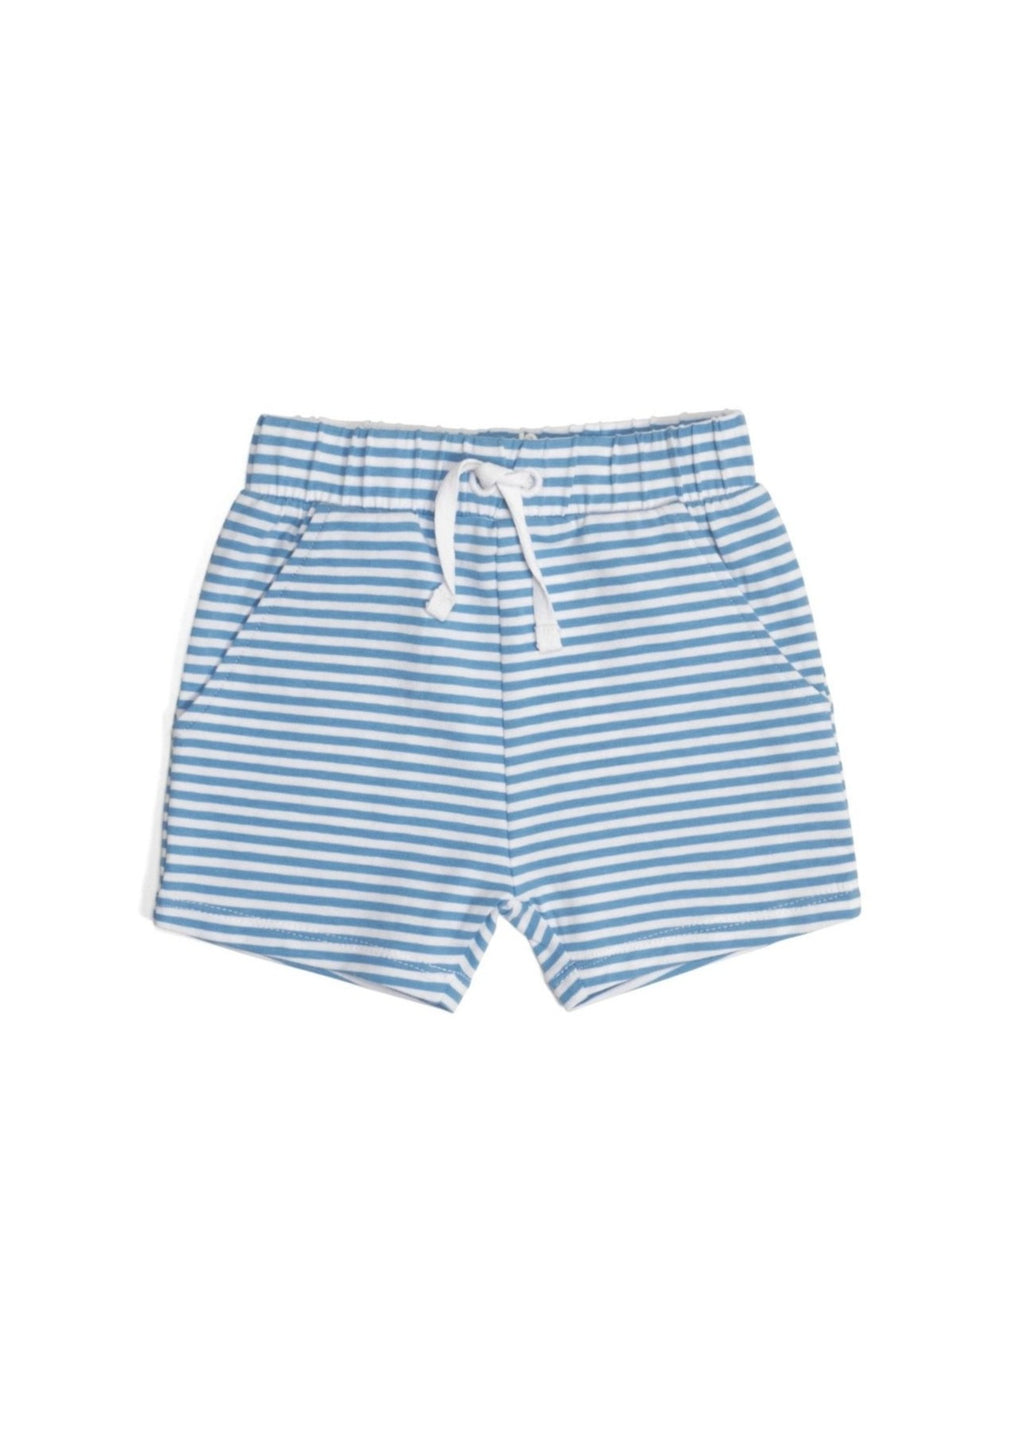 Cotton Shorts - Blue Stripe, by Little Bee Wild and free, under the stars and among the trees. Nothing beats the joy of seeing the world through fresh eyes as your little adventurer discovers the great outdoors.  So hit the road and enjoy nature’s playground with your little campers.  Little Bee by Dimples, On the Road, 2023 Summer Collection is made using Oeko-Tex Certified Organic Cotton. Have your little adventurer dressed in style with Little Bees classic stripe.